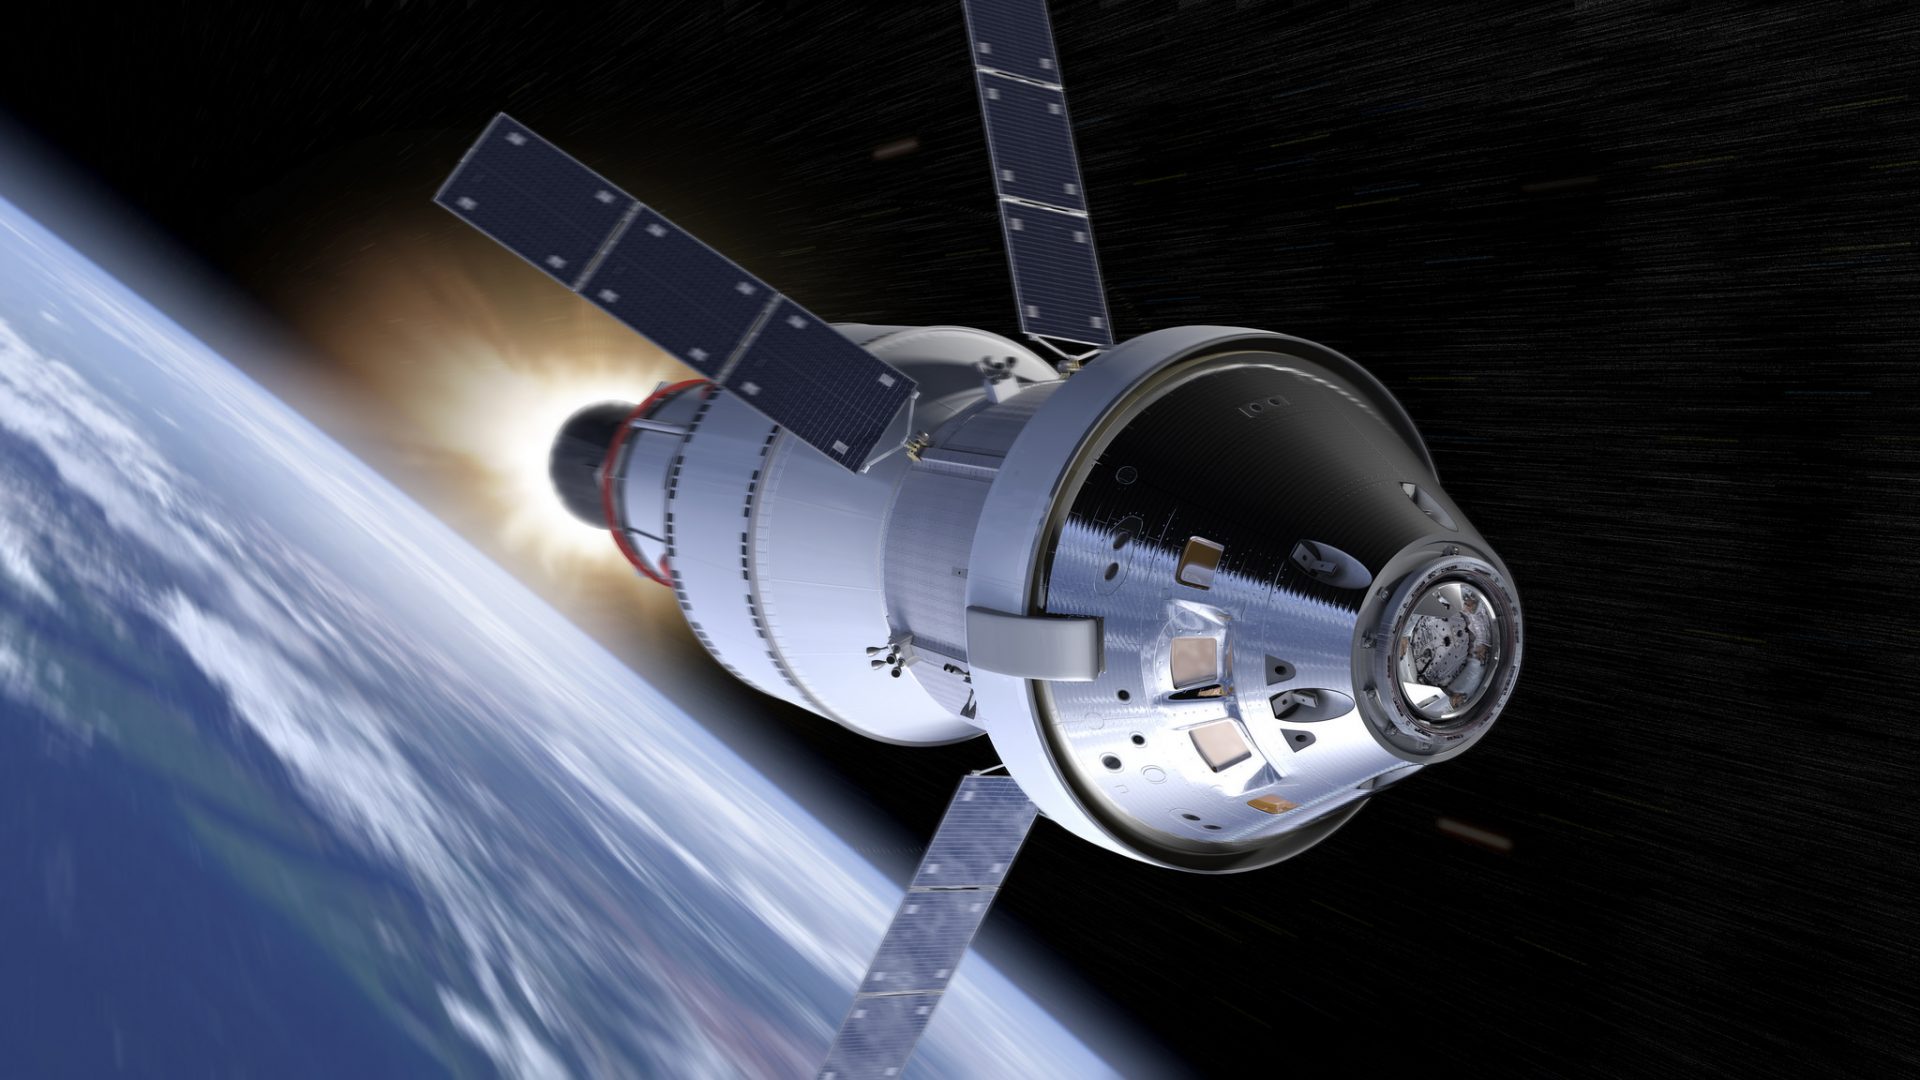 NASA’s inspector general raises questions with fee administration of Orion spacecraft